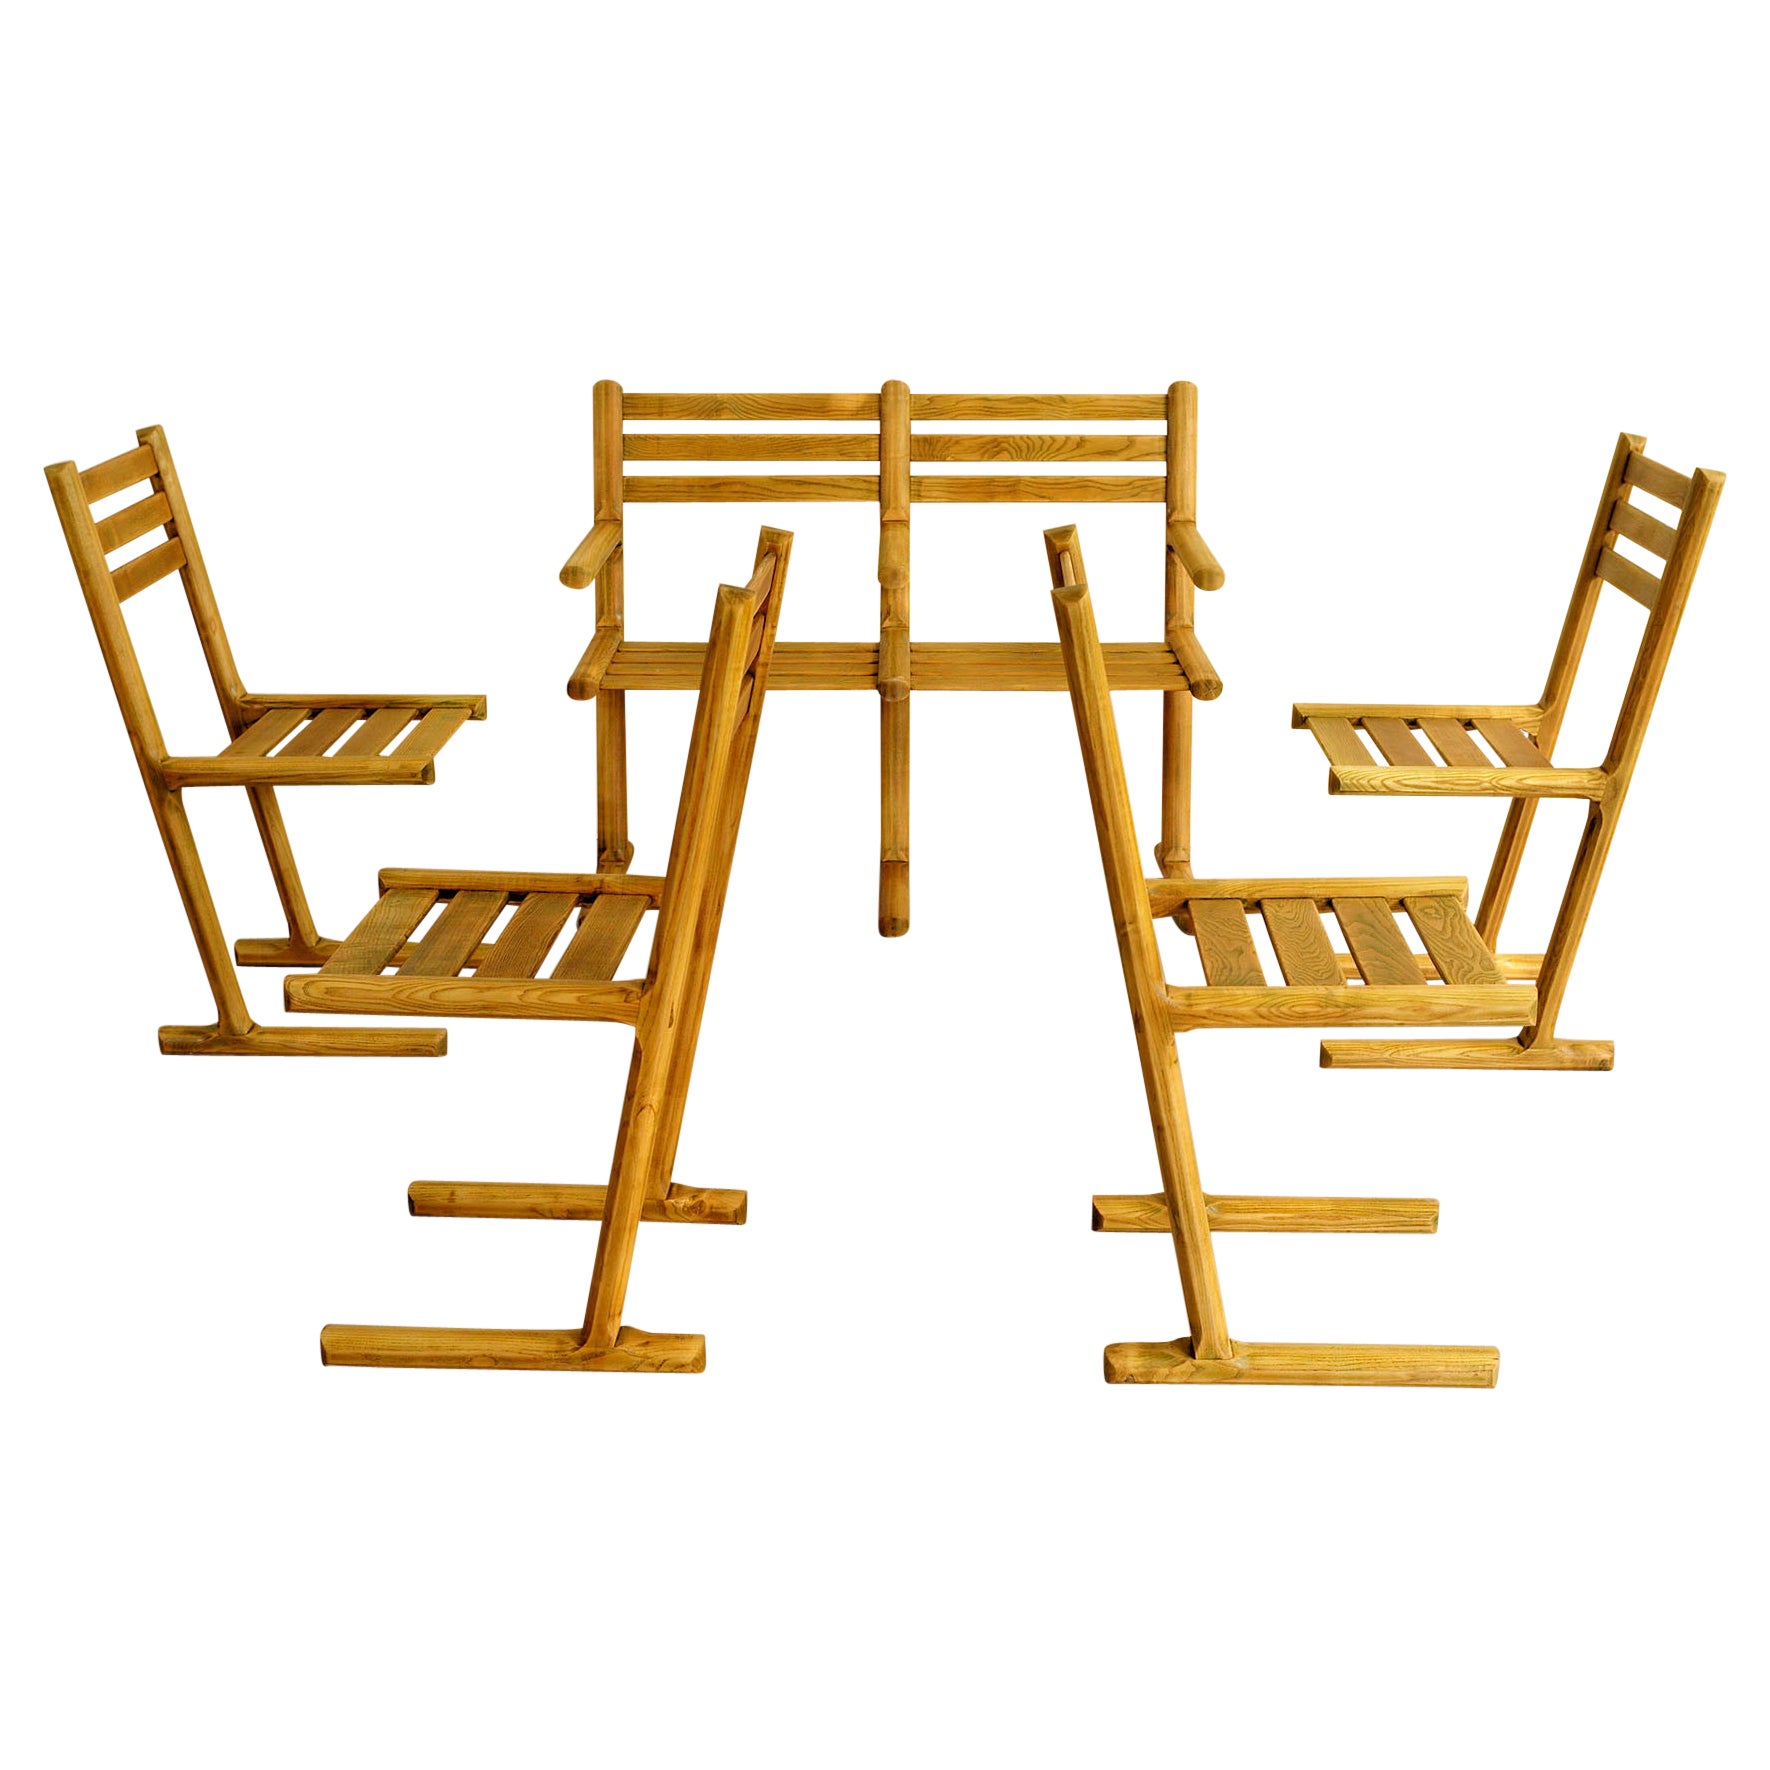 Set of 4 Chairs and 1 Wooden Bench, France, 1960 For Sale